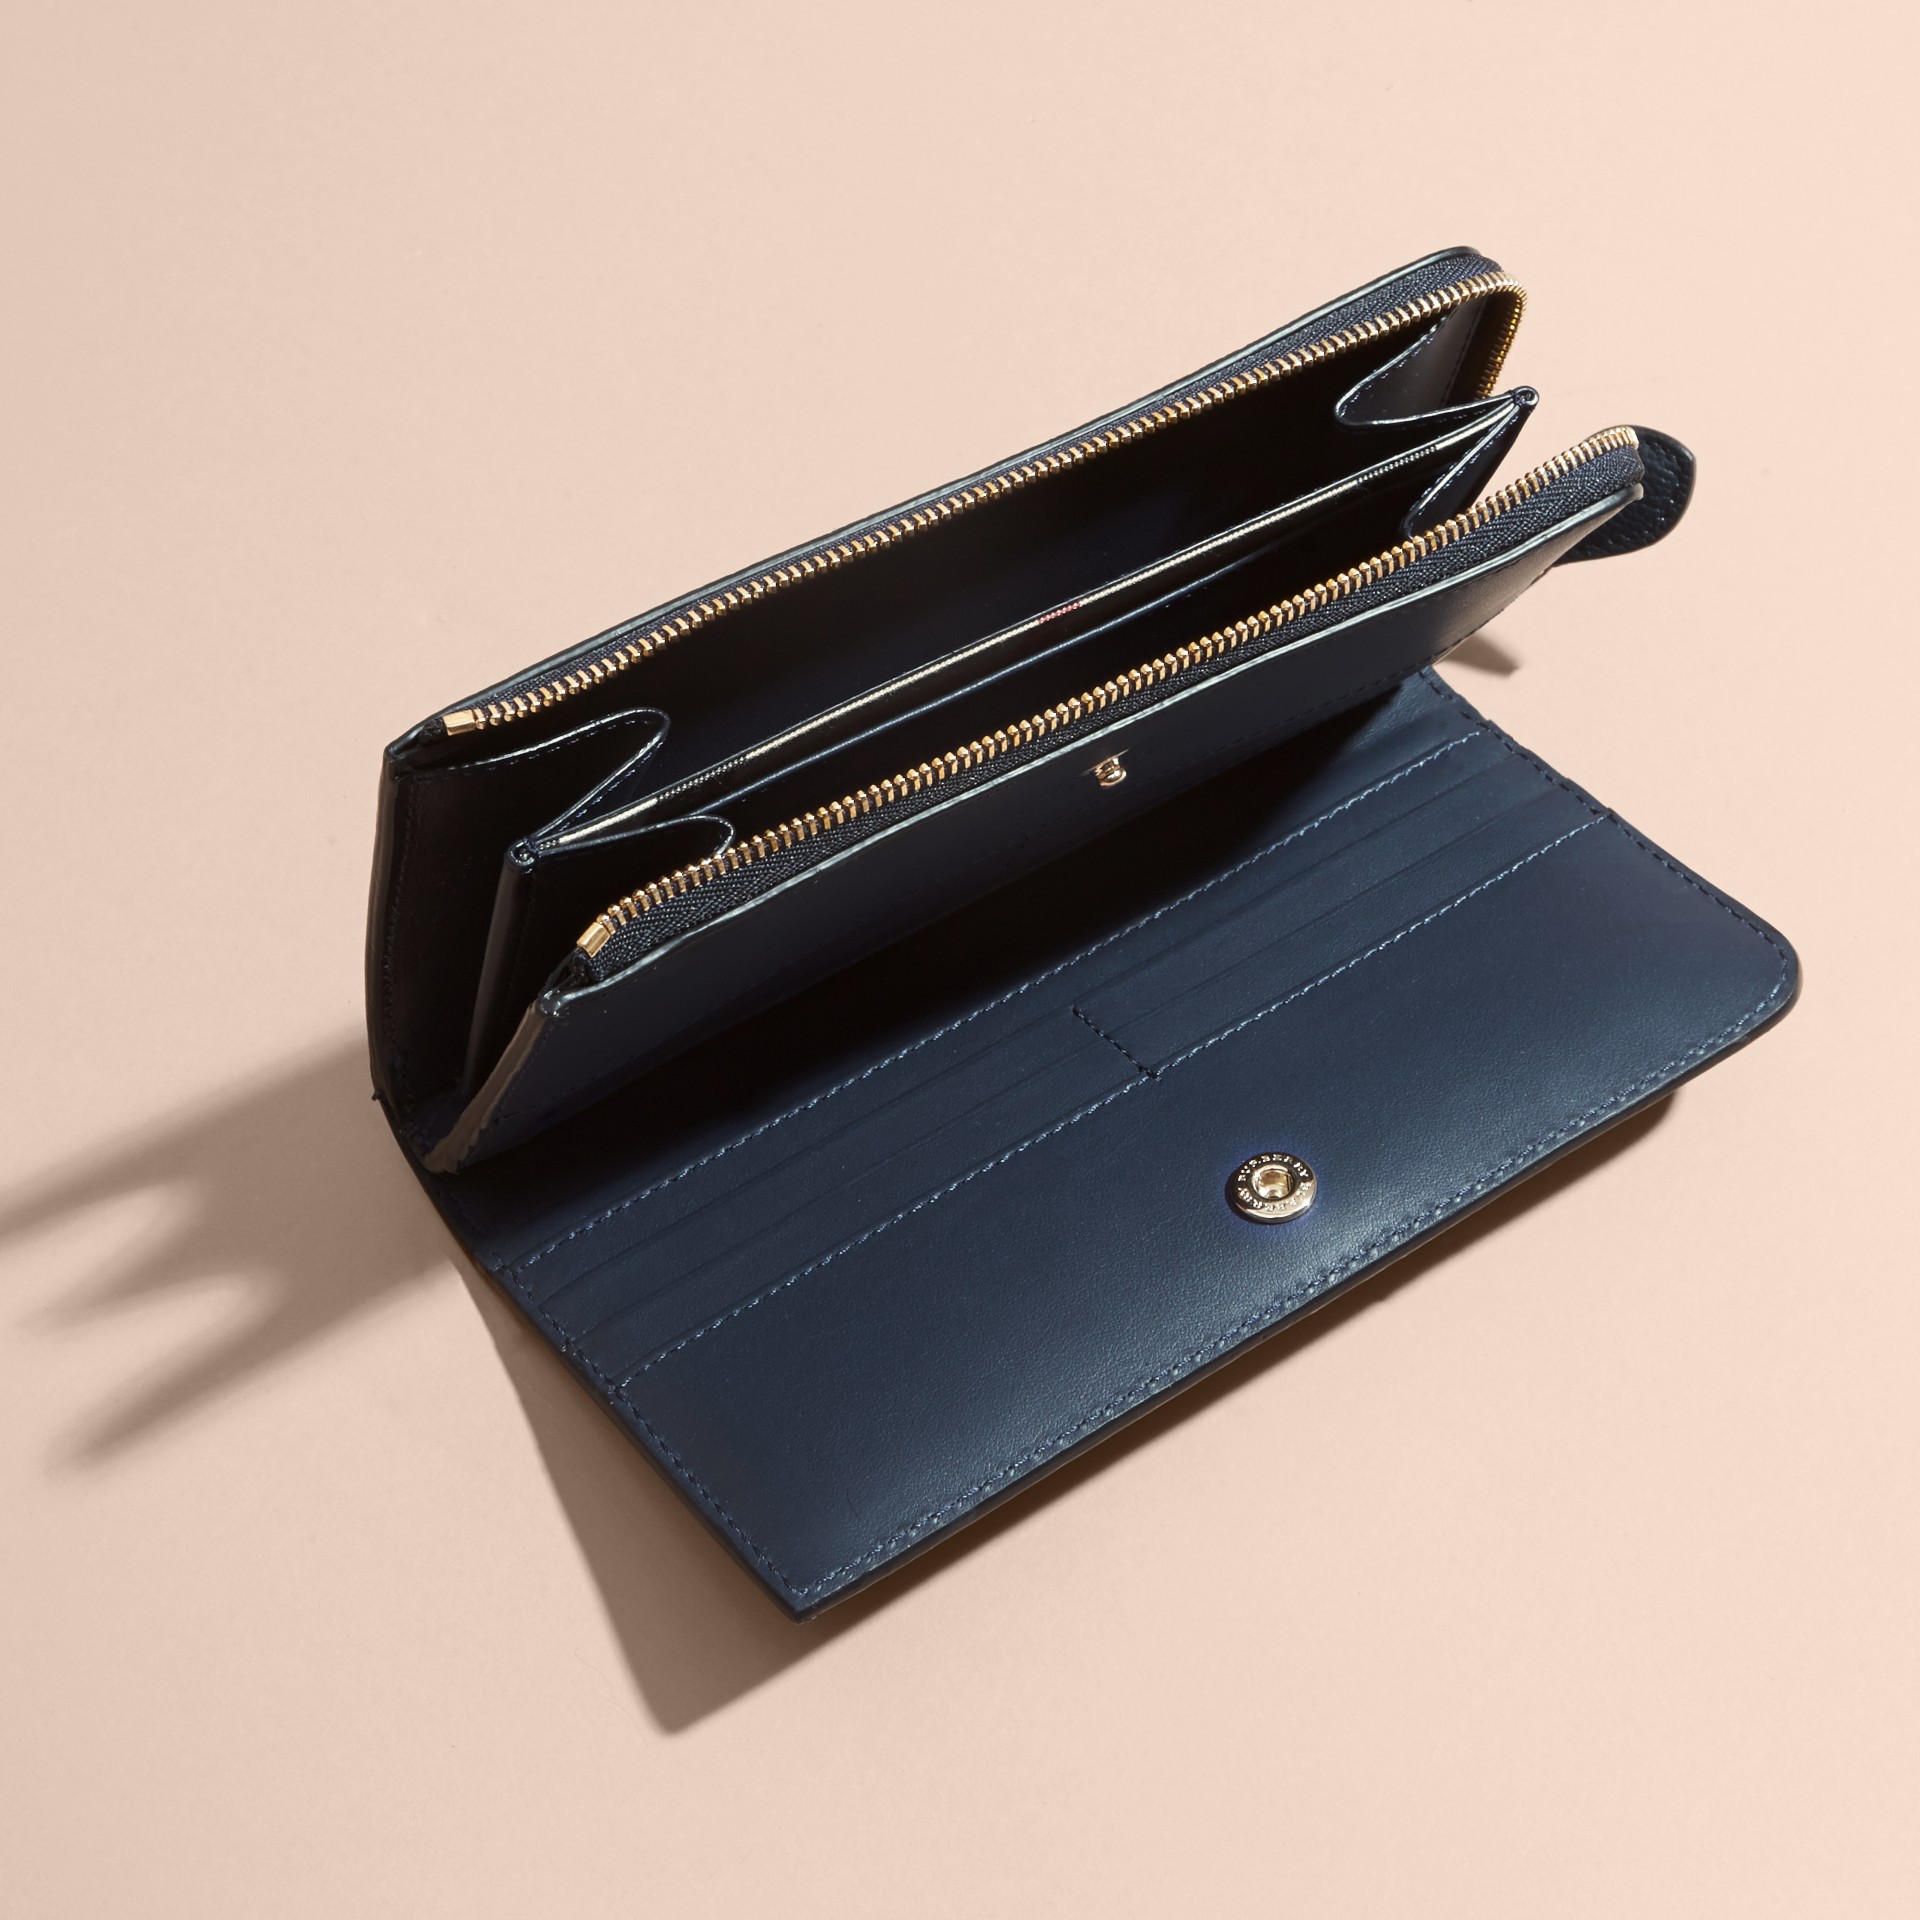 Grainy Leather Ziparound Wallet in Blue Carbon - Women | Burberry